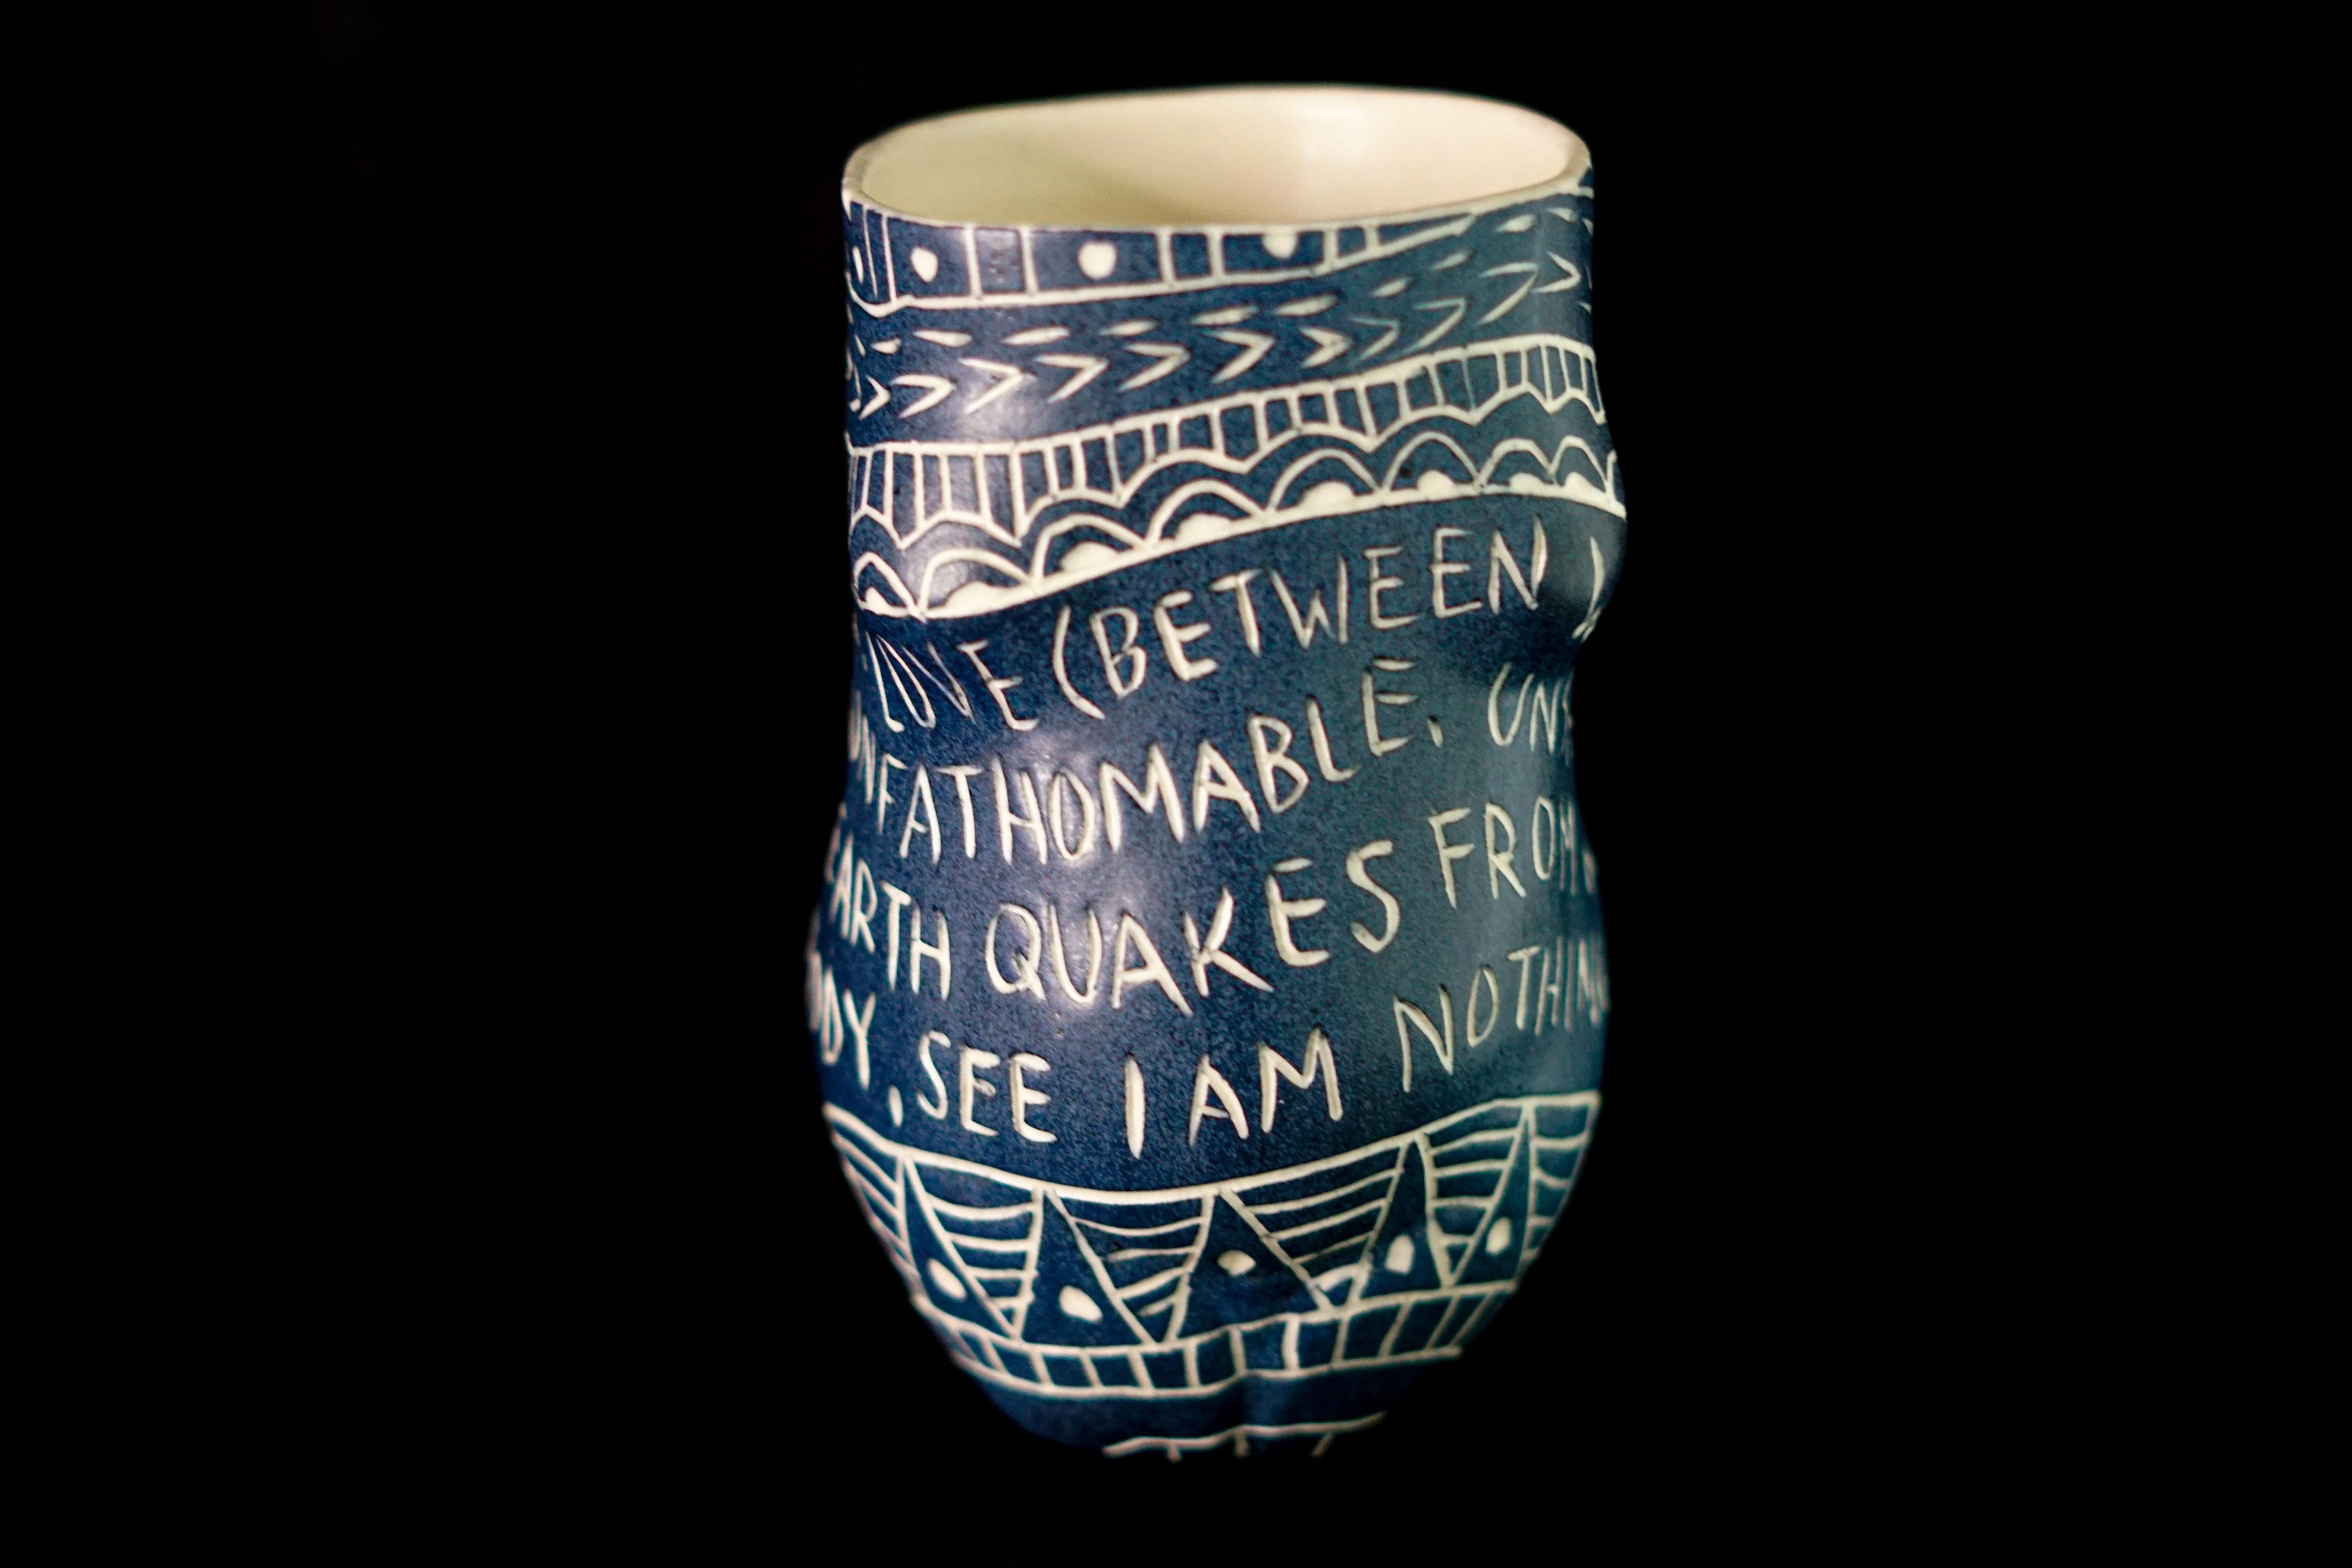 Love (Between Women)…, Porcelain Cup with Sgraffito Detailing - Sculpture by Alex Hodge